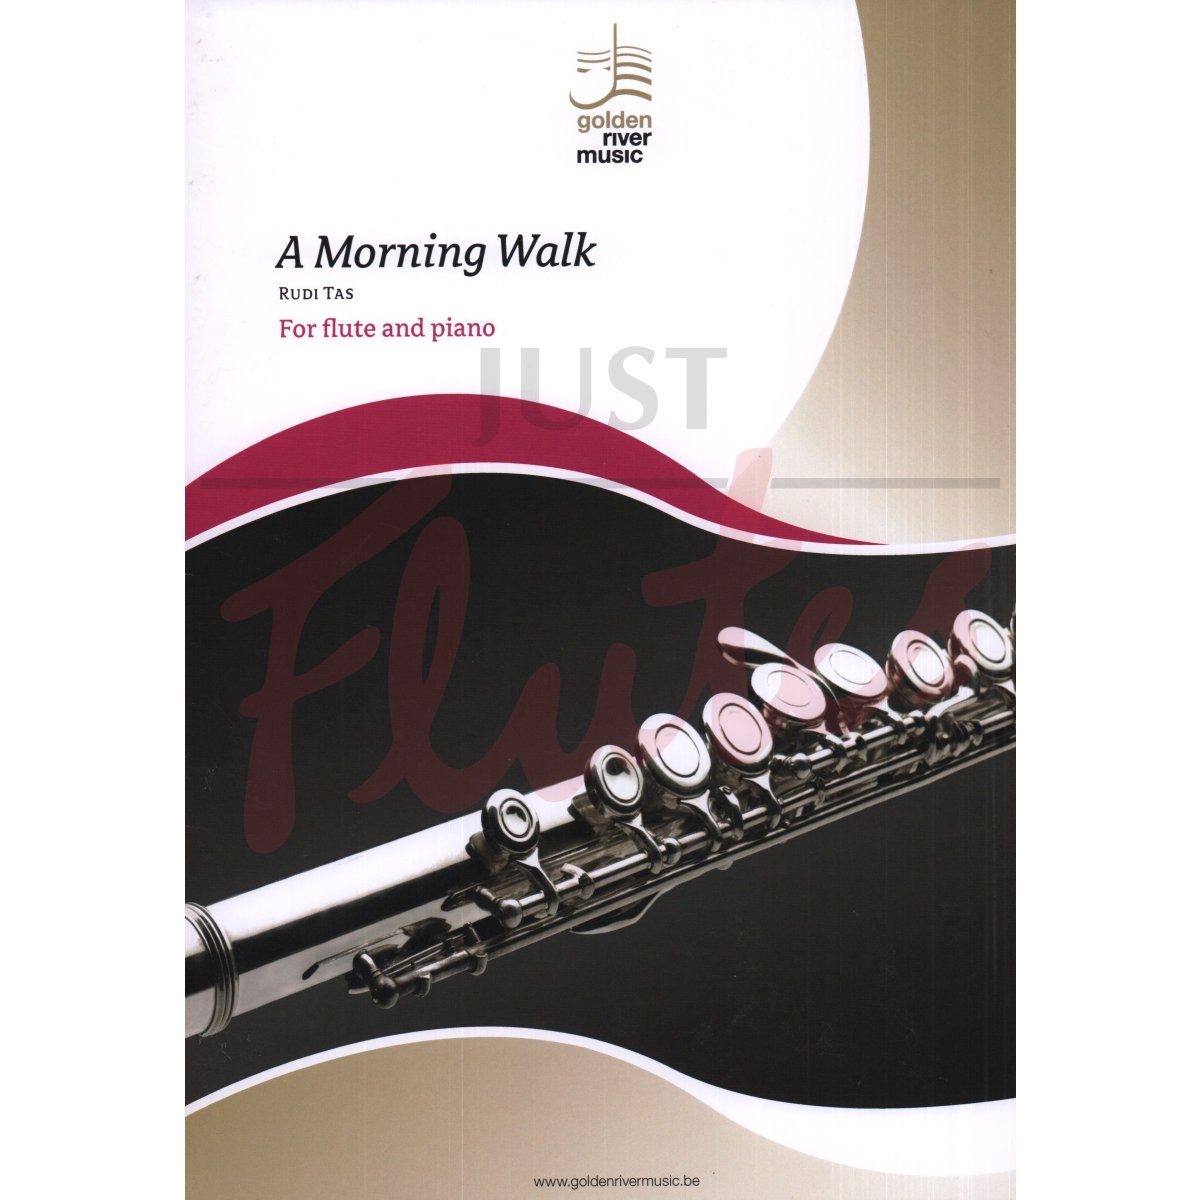 A Morning Walk for Flute and Piano